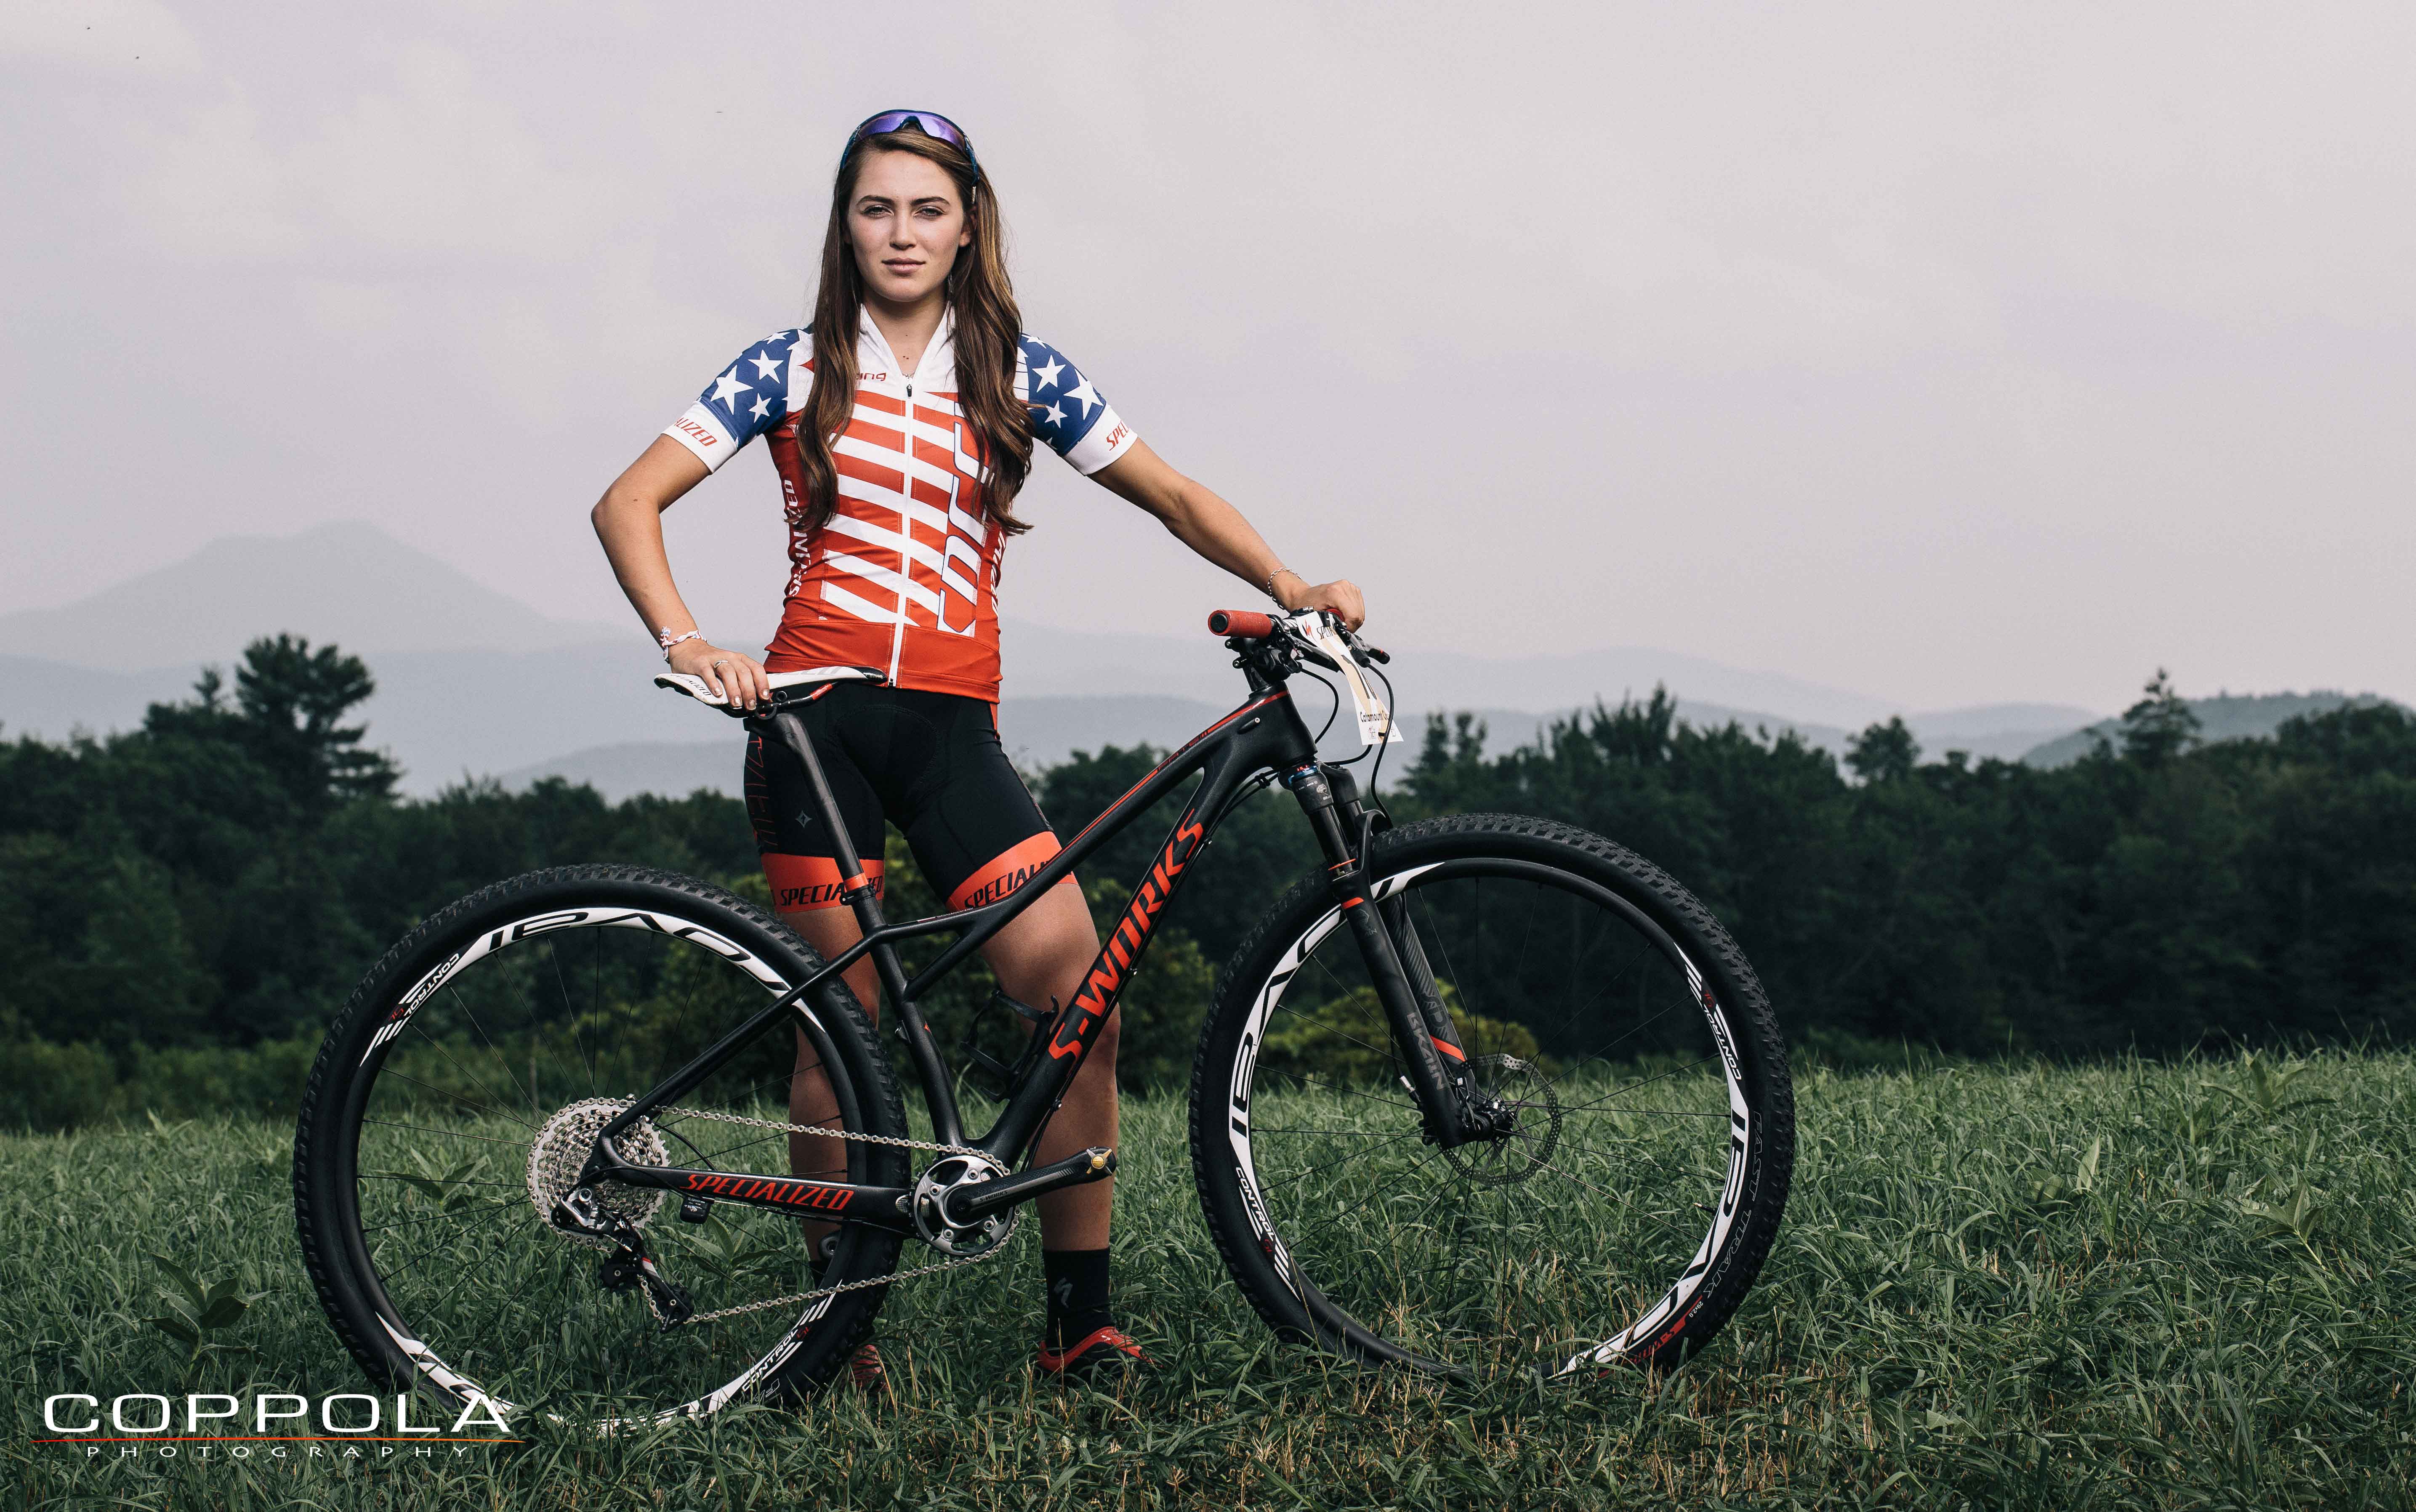 Coppola Photography: Kate Courtney, National Champion Mountain Biker, on location athlete marketing. Adventure, portrait, cyclist. Specialized. S-Works. mountain bike images